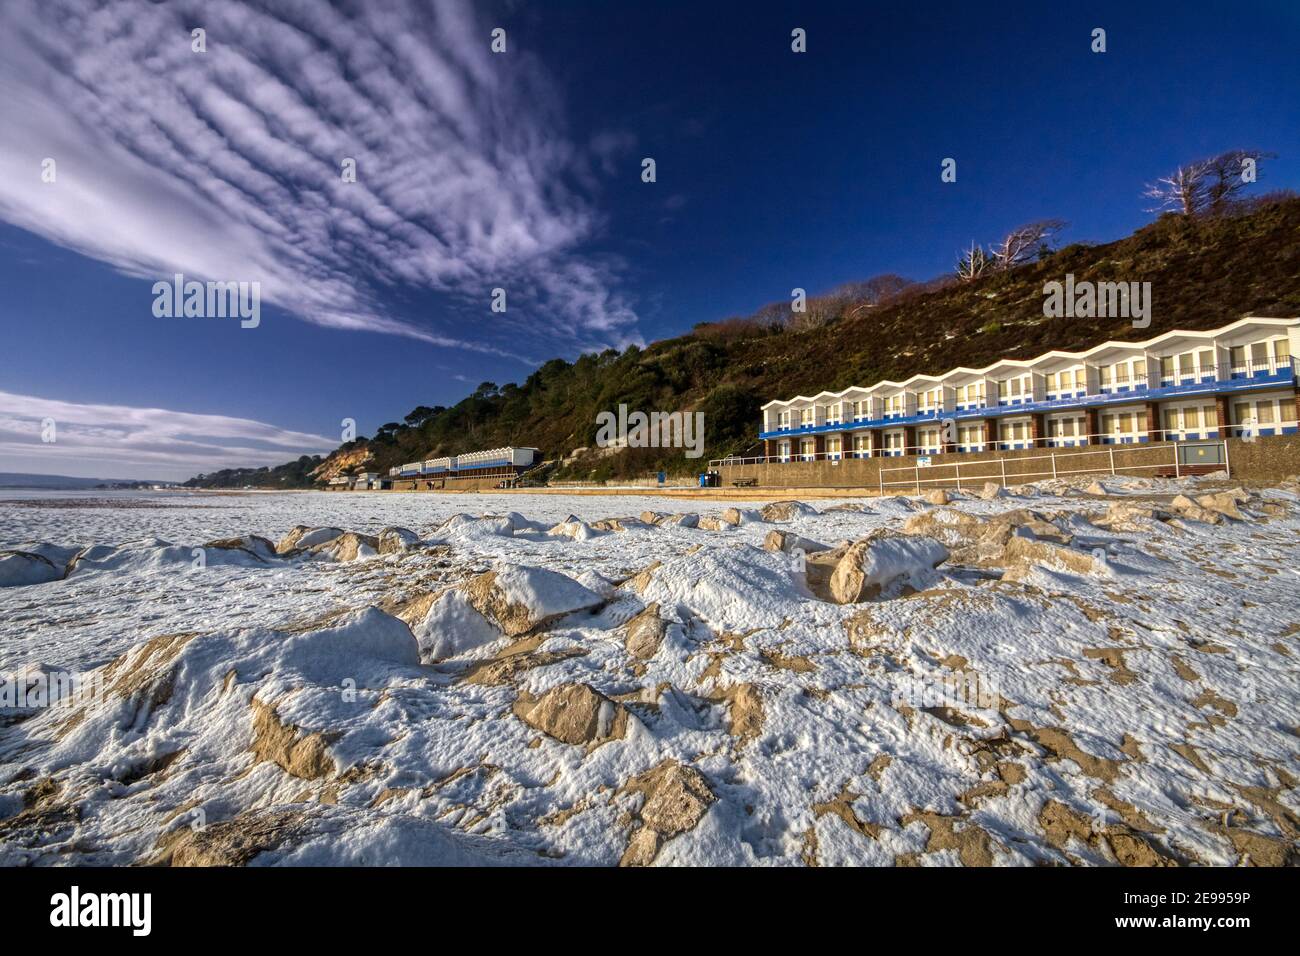 The Fourth Dimension - Adding Snow to the Sun, Sea and Sand Stock Photo